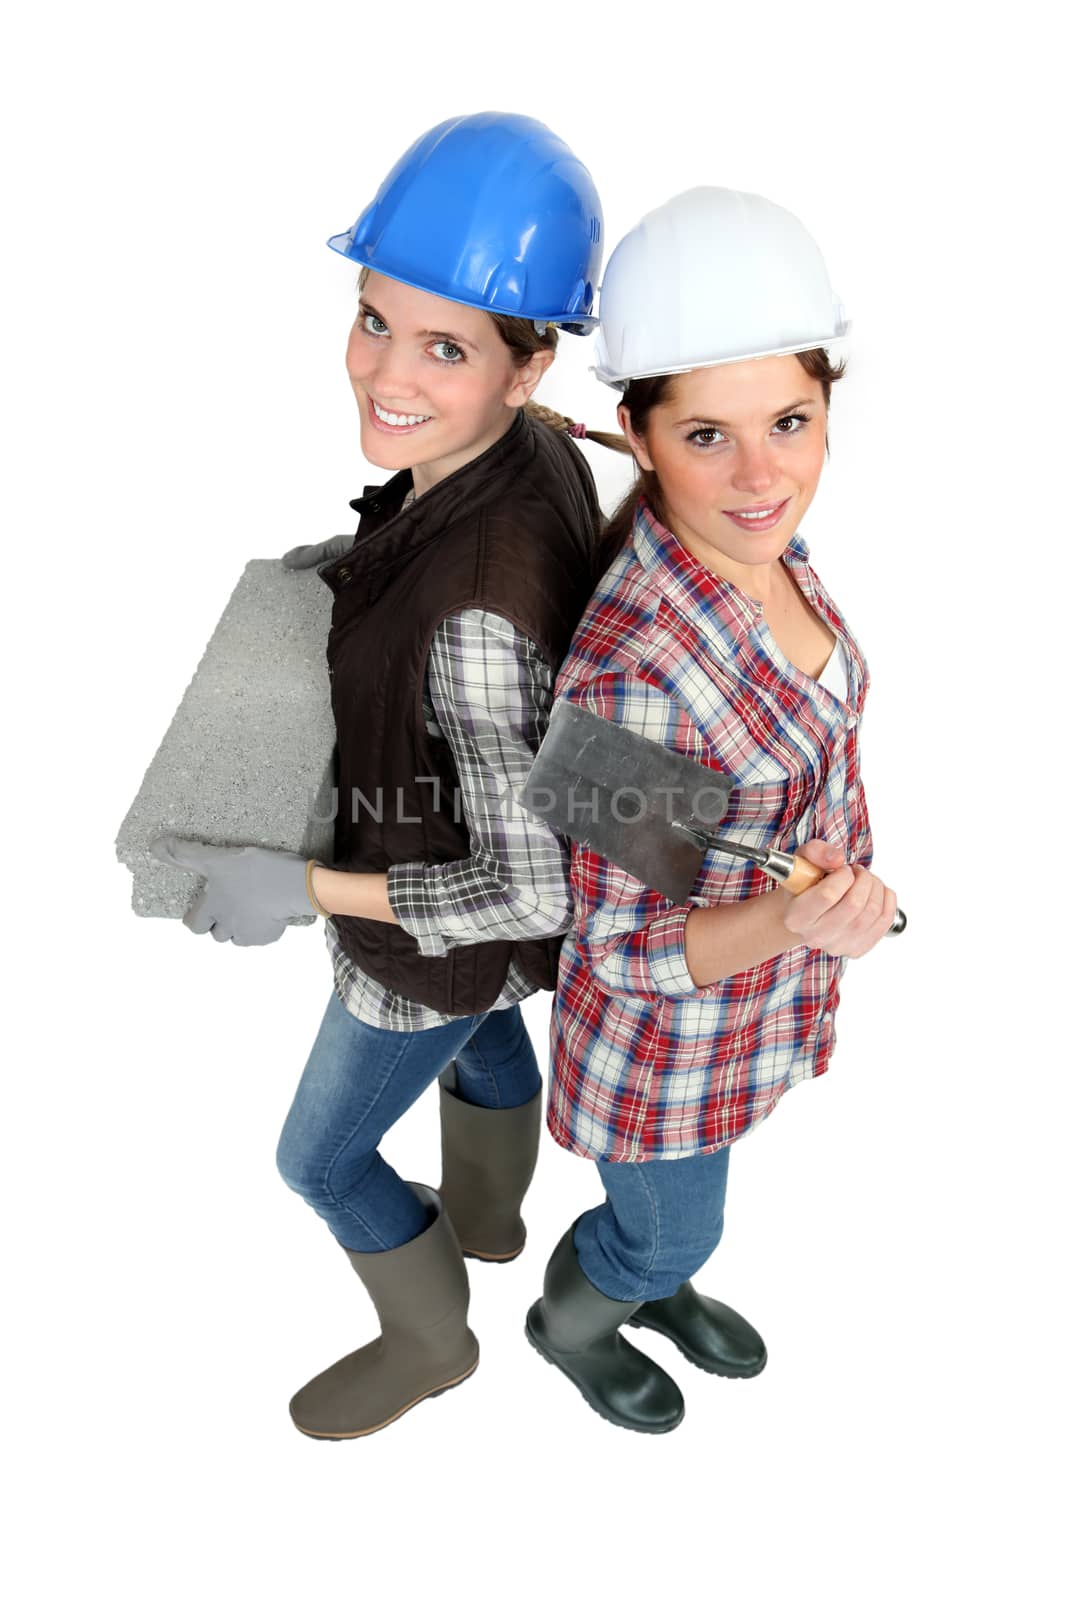 Two female bricklayers